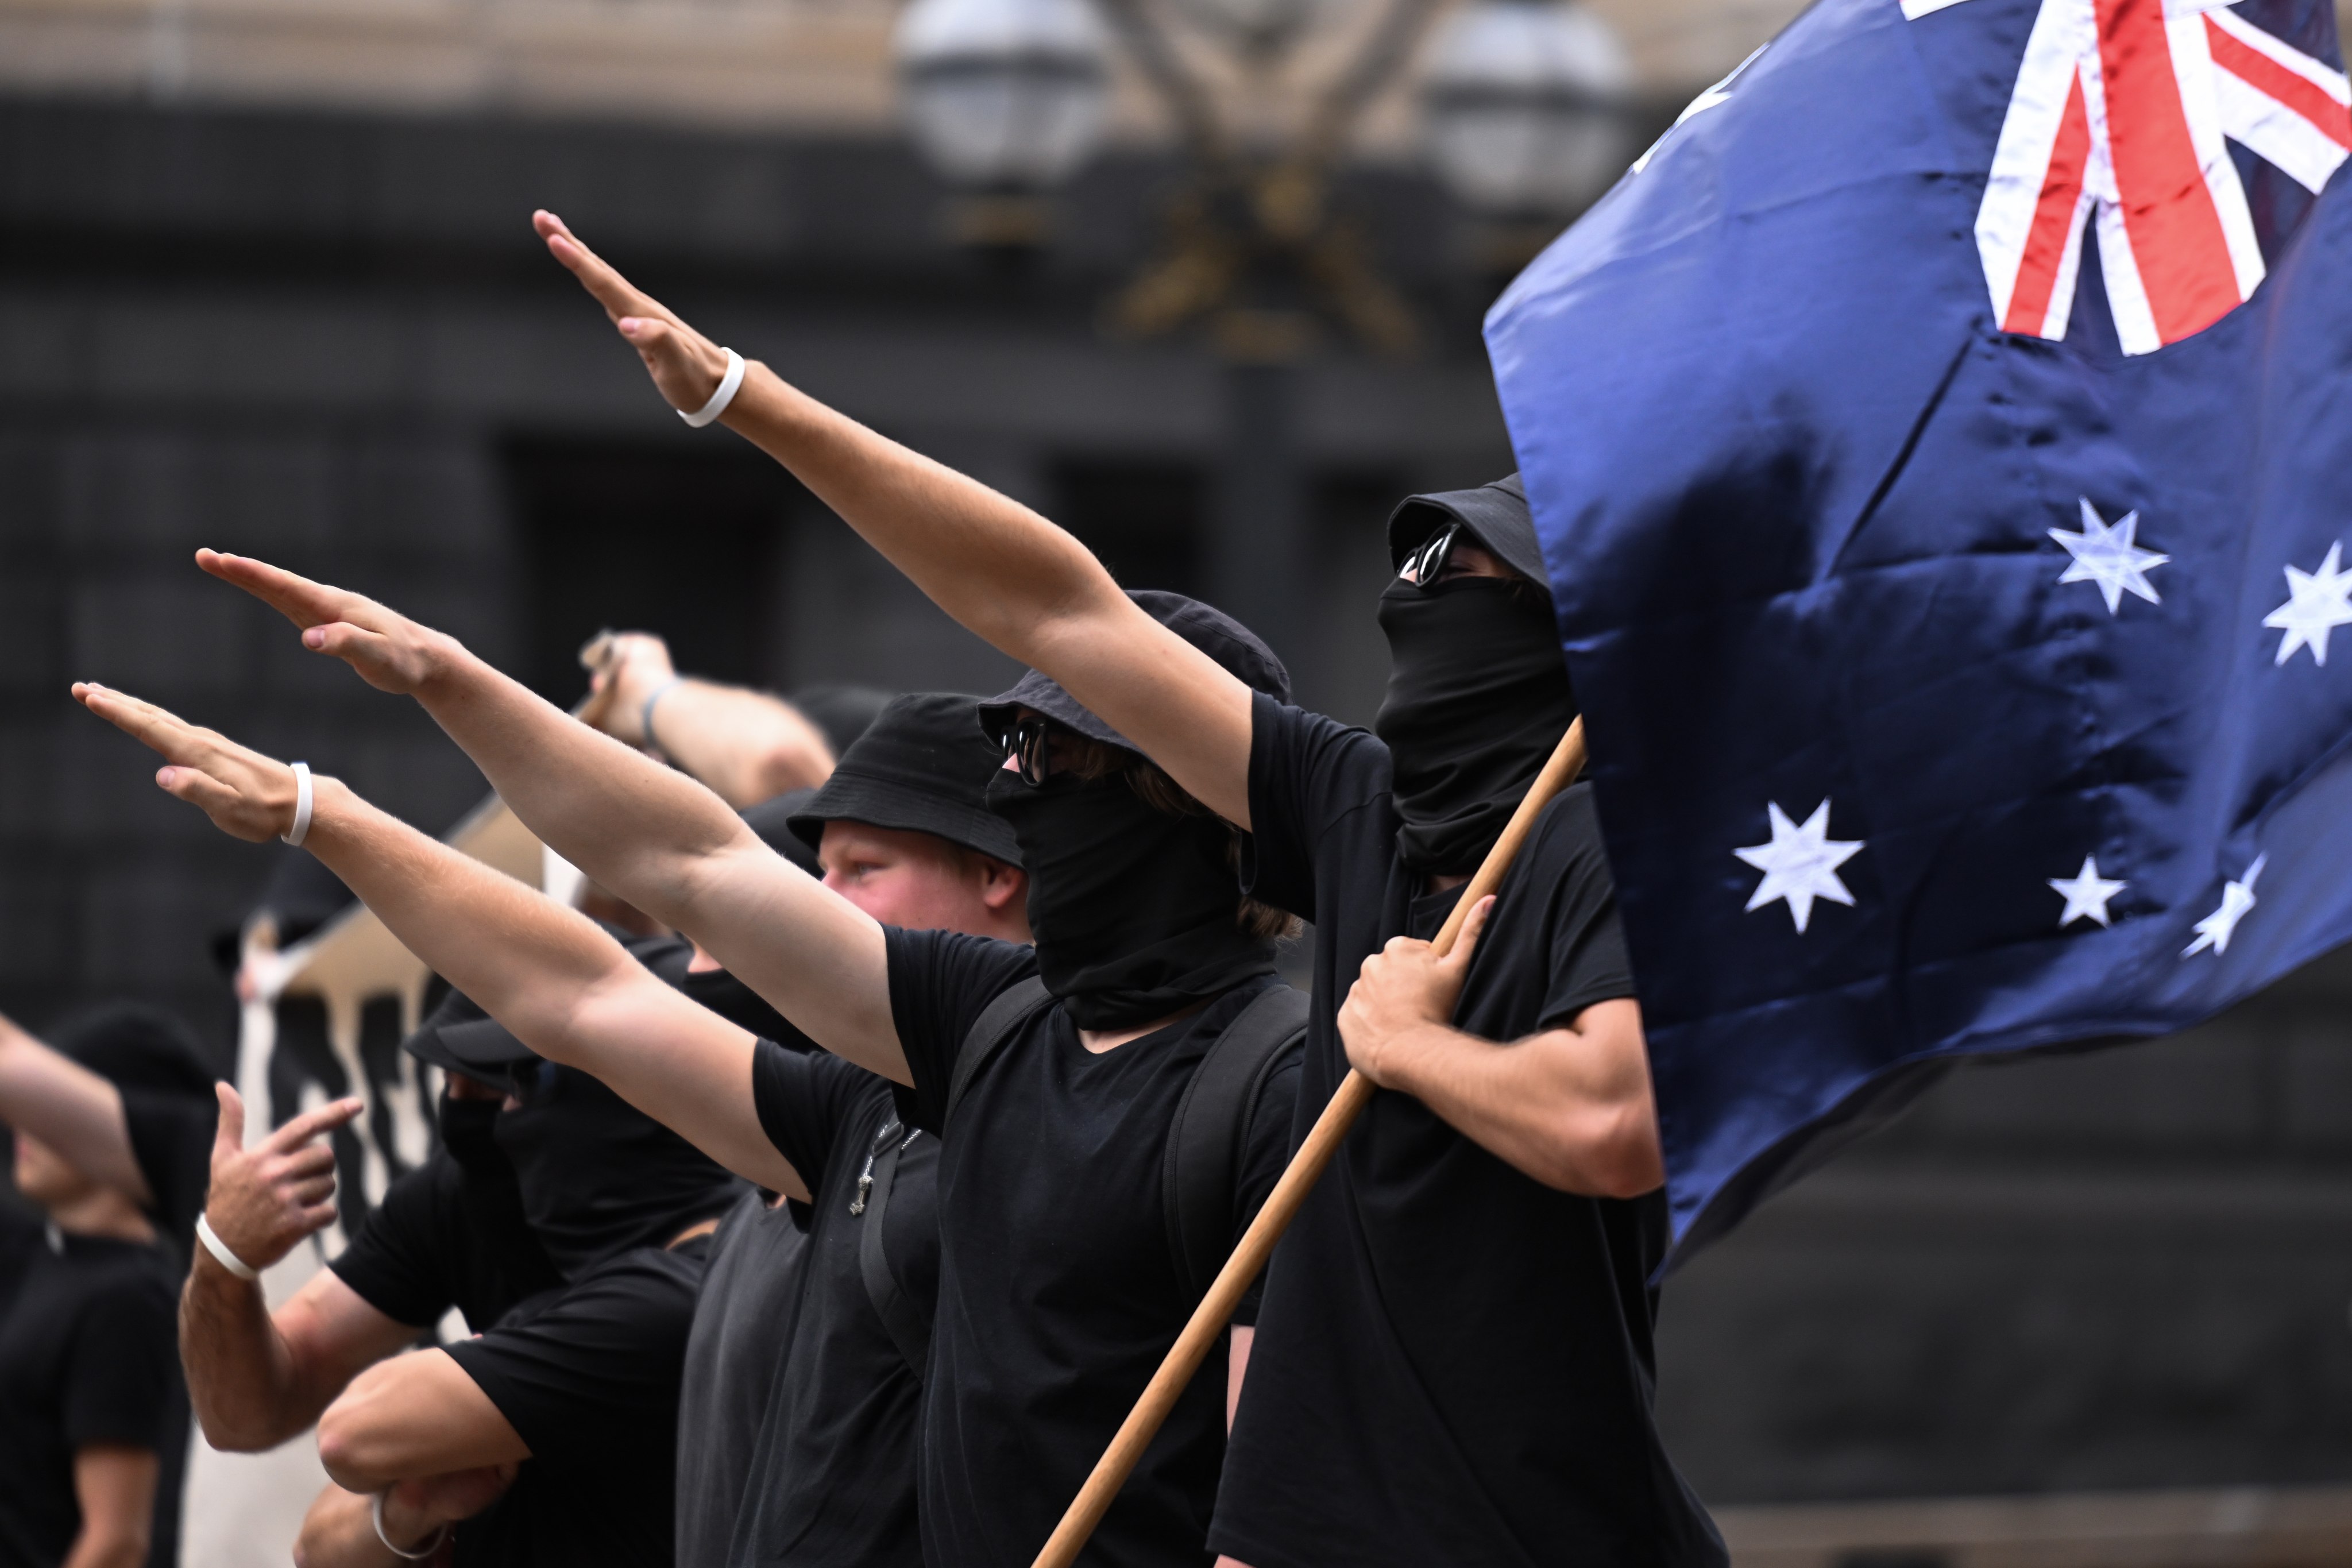 Neo-Nazi protesters flash Nazi salutes outside Parliament House in Melbourne last year. Photo: EPA-EFE